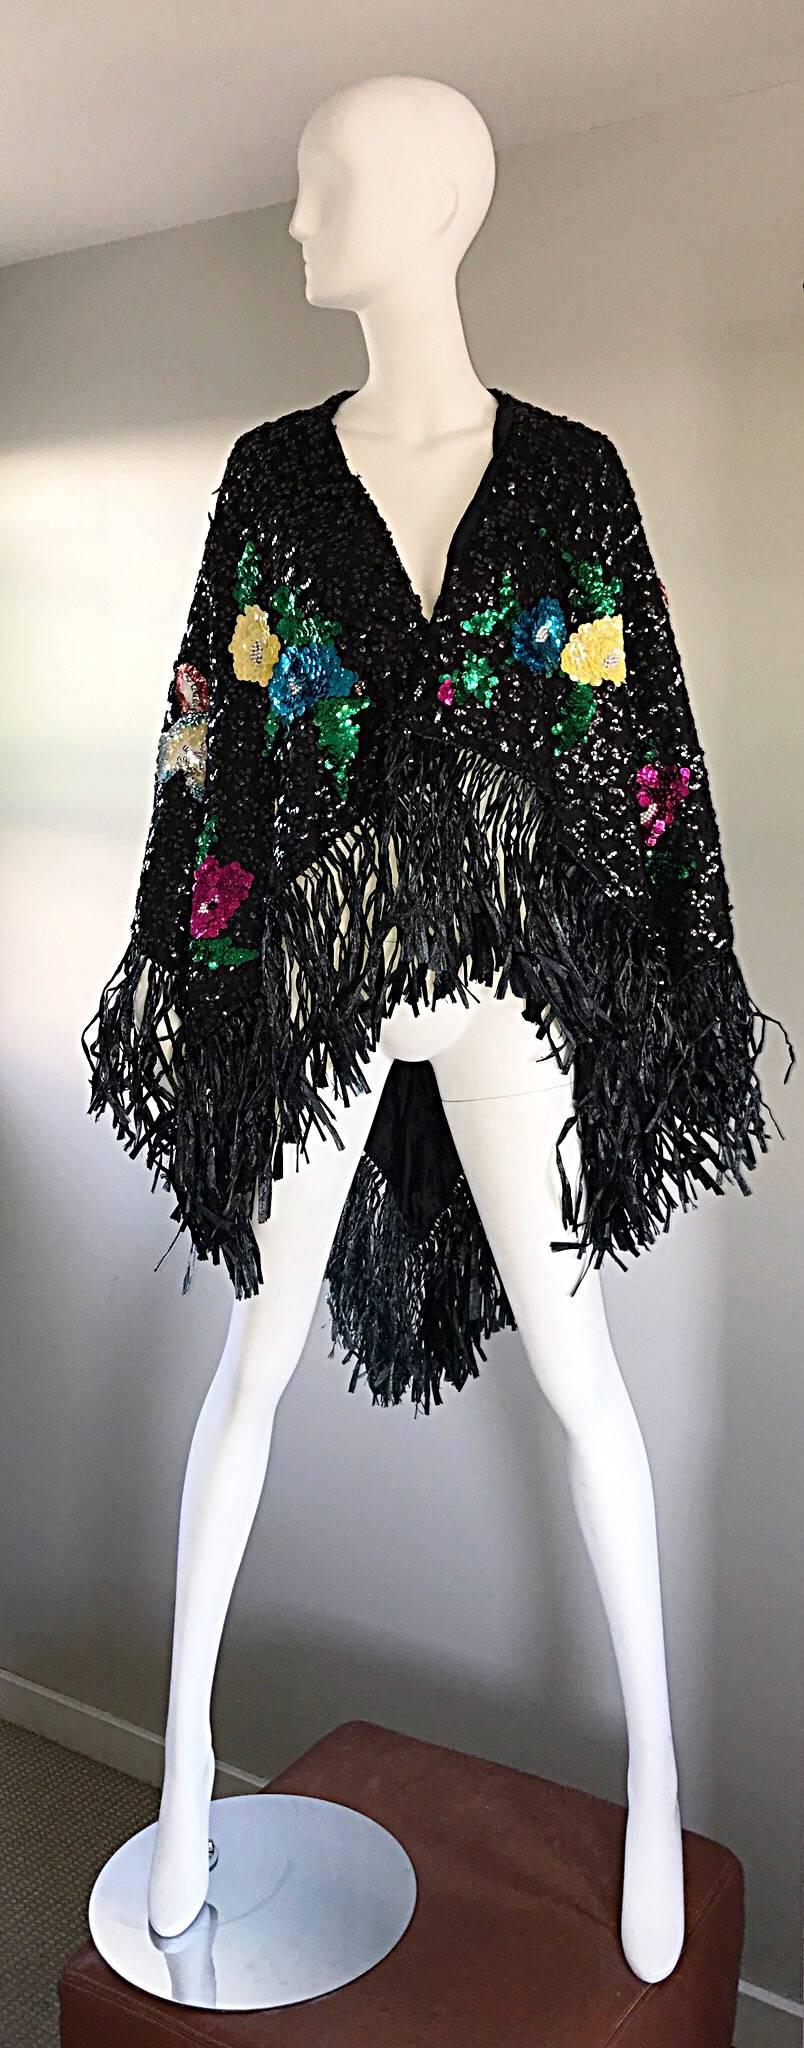 Amazing vintage 1970s black oversized sequin piano shawl! Features thousands of hand-sewn sequins with sequined and beaded flower and foliage appliqués throughout. Black raffia / straw fringe at the edges. Can easily be dressed up or down. Great